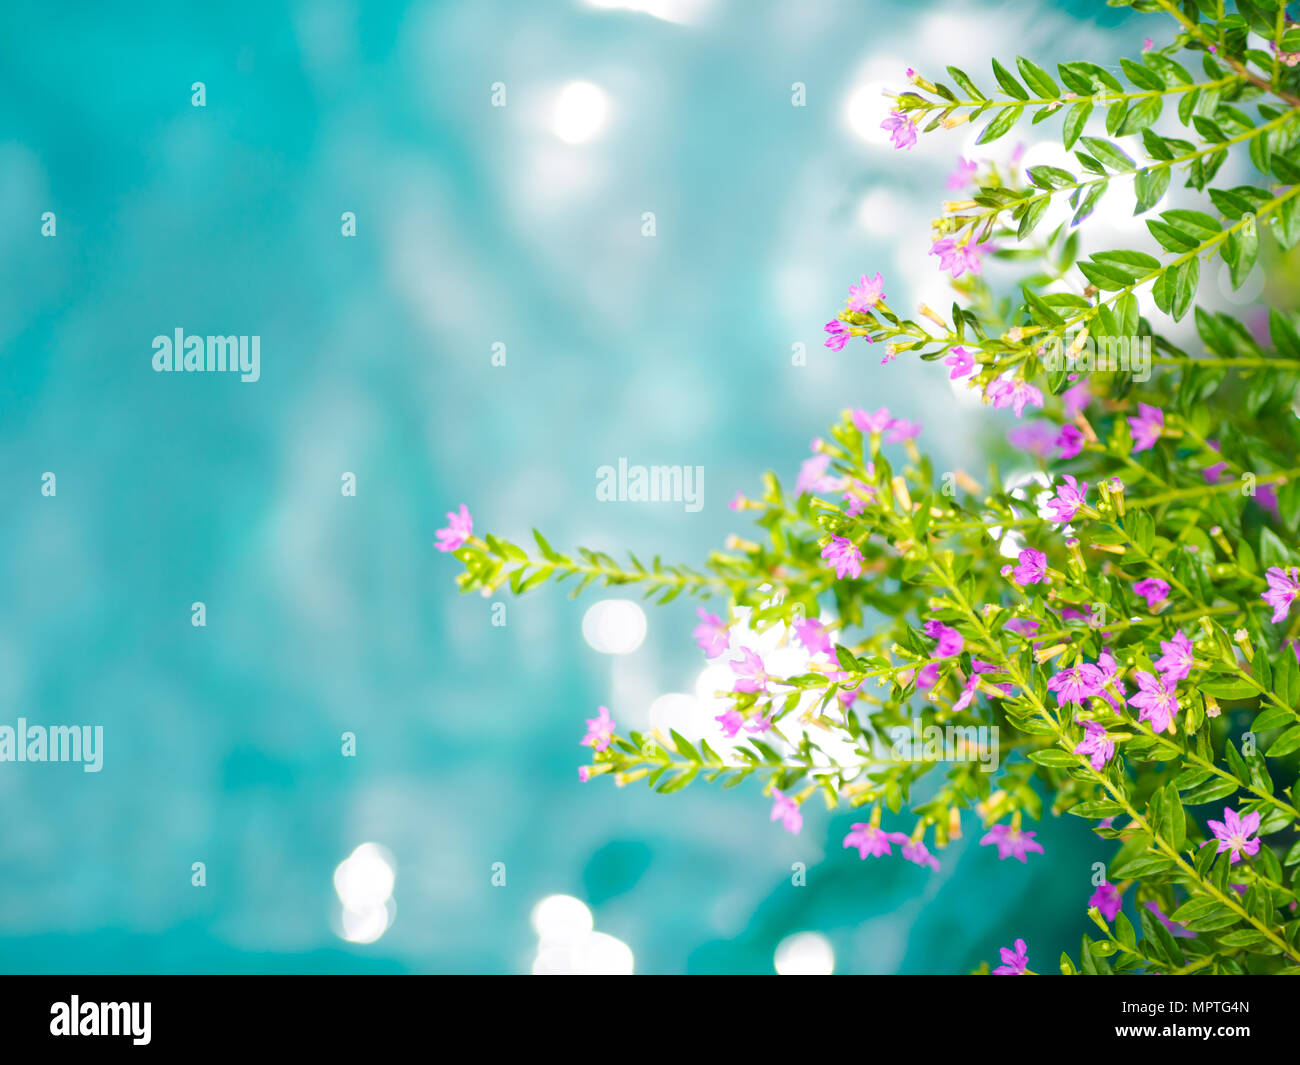 Soft focus beautiful purple Cuphea hyssopifolia flower with blue and green water background. Stock Photo